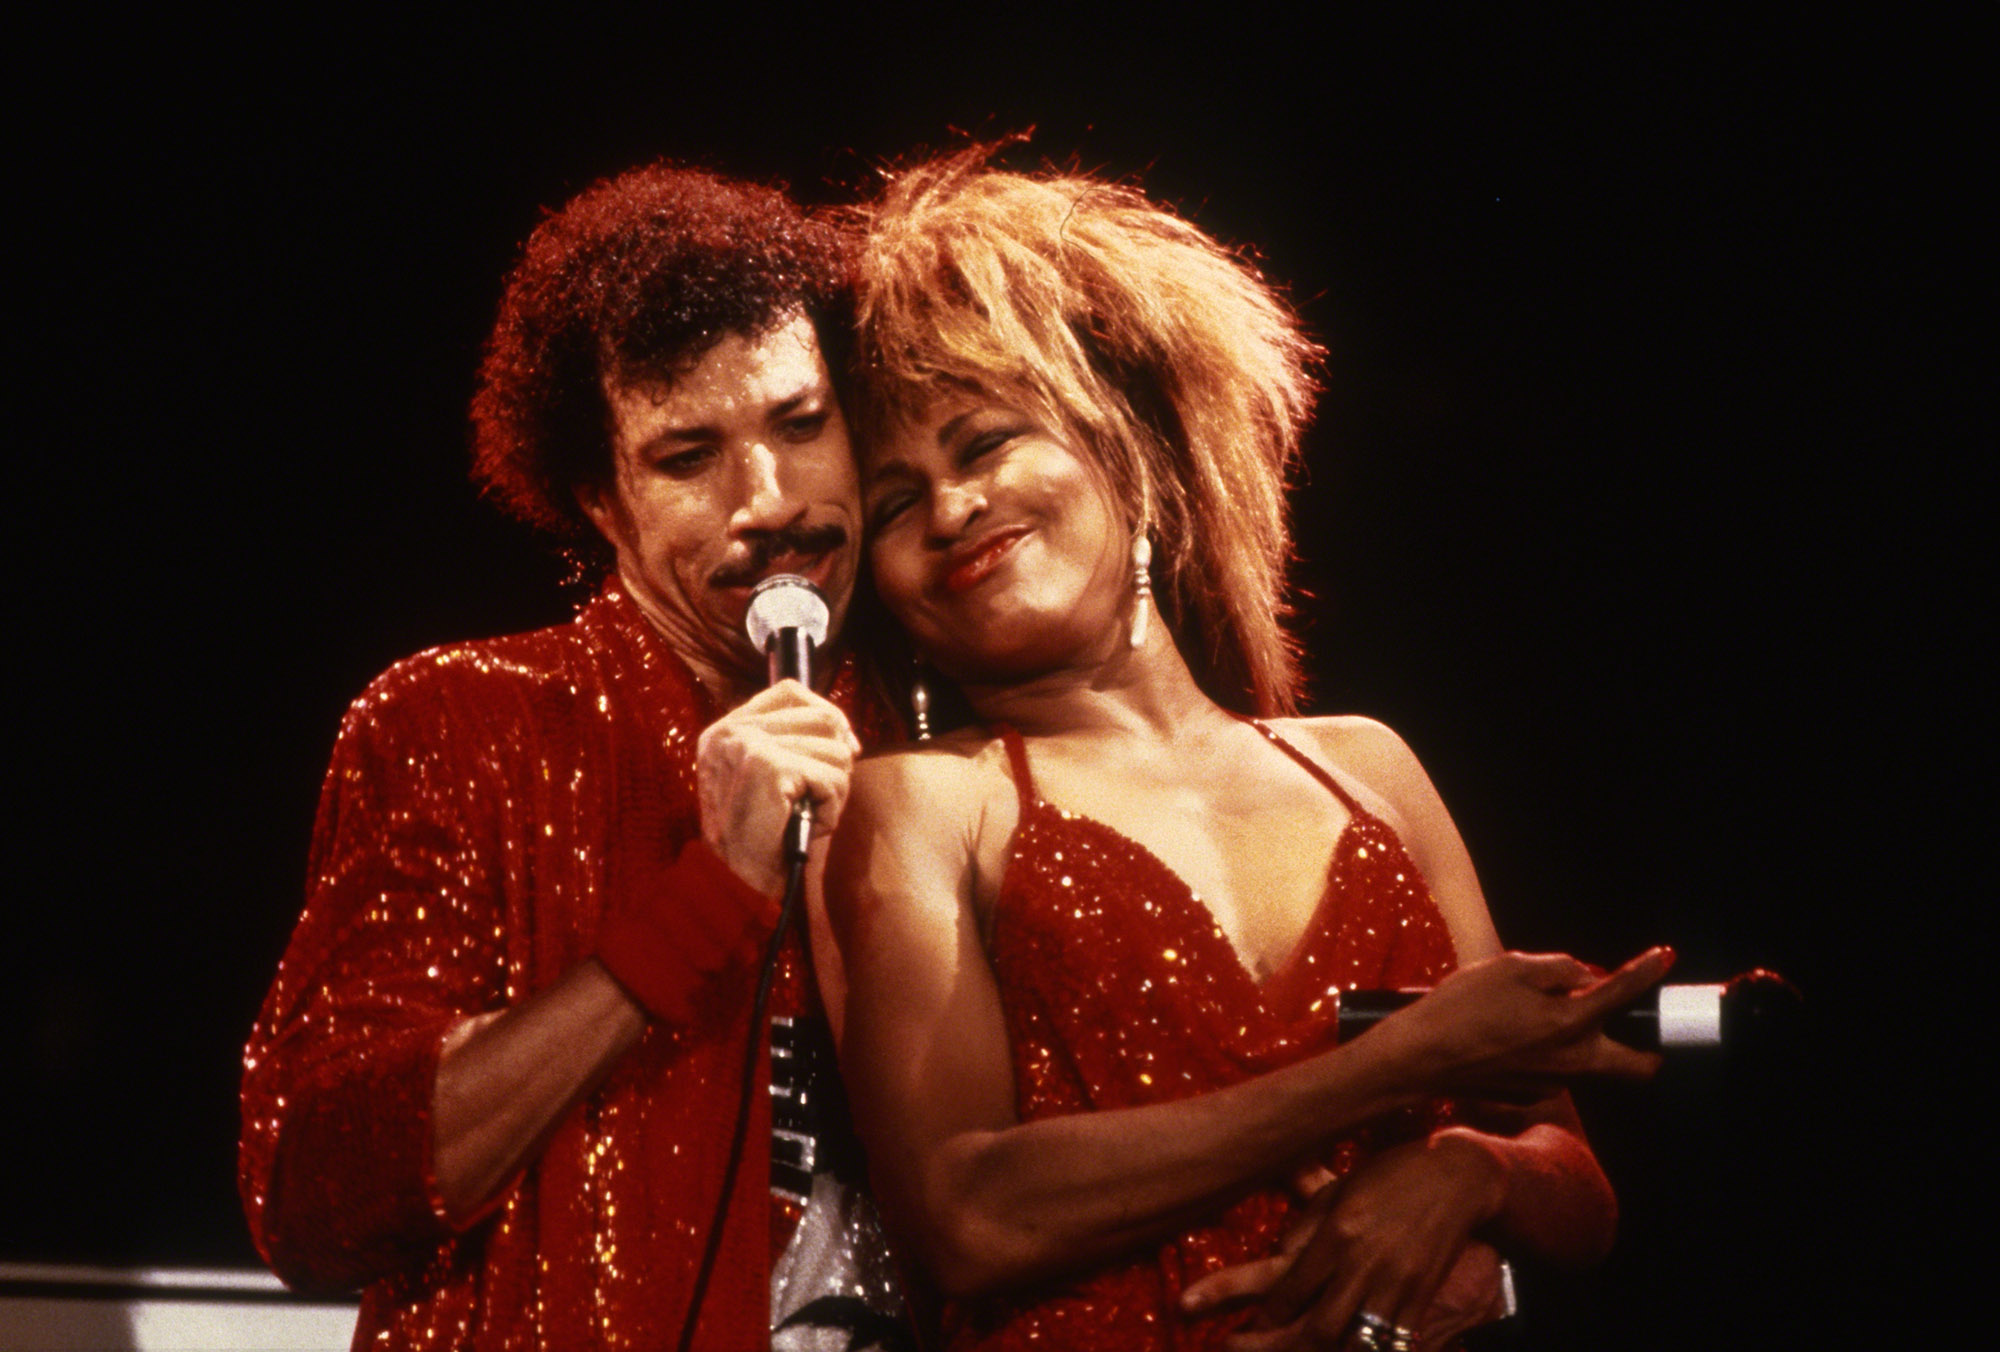 CIRCA 1985: Lionel Richie performs with Tina Turner circa 1985. (Photo: Jerry Wachter / IMAGES / Getty Images)